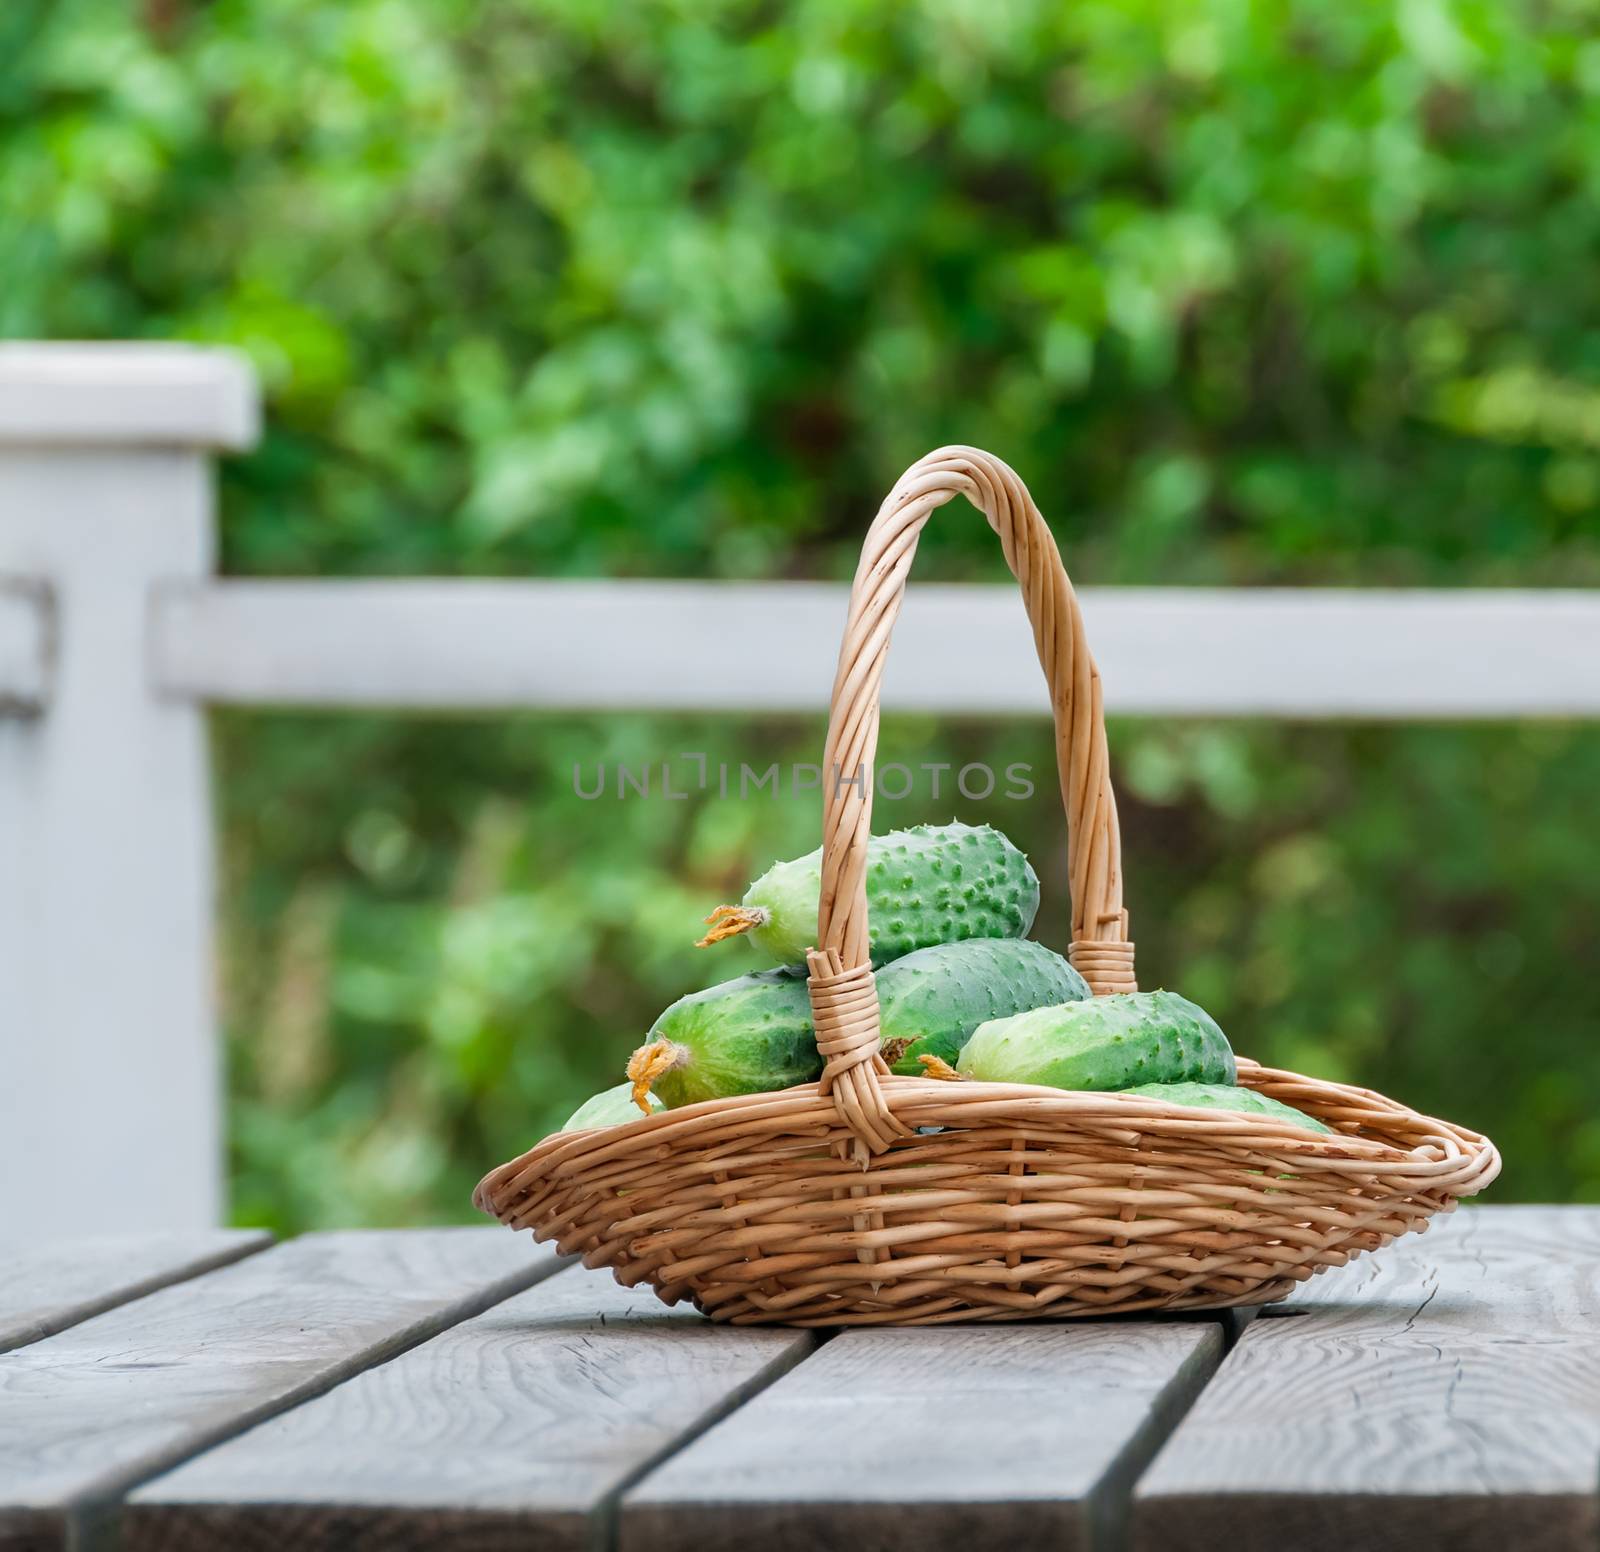 Cucumbers in a basket on a background of nature